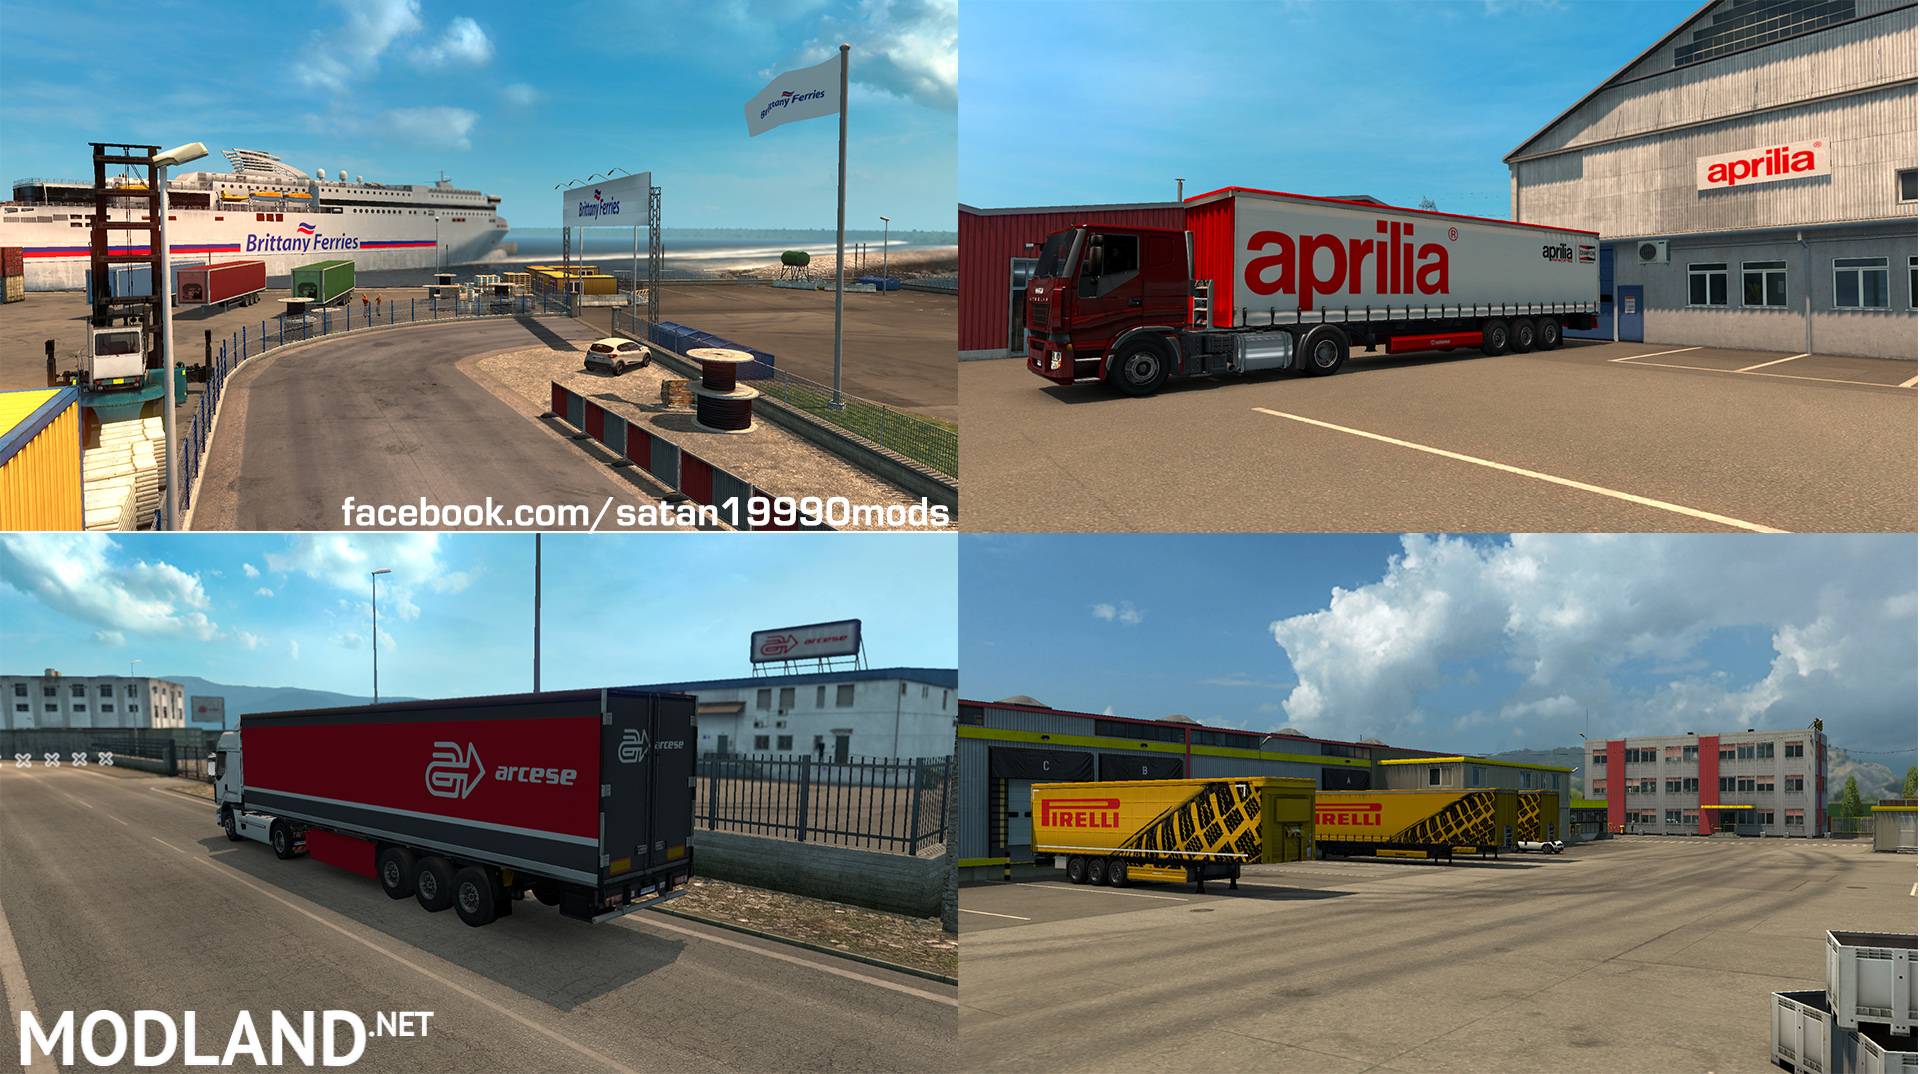 Mod changing company logos and trailer skins for painting real companie...